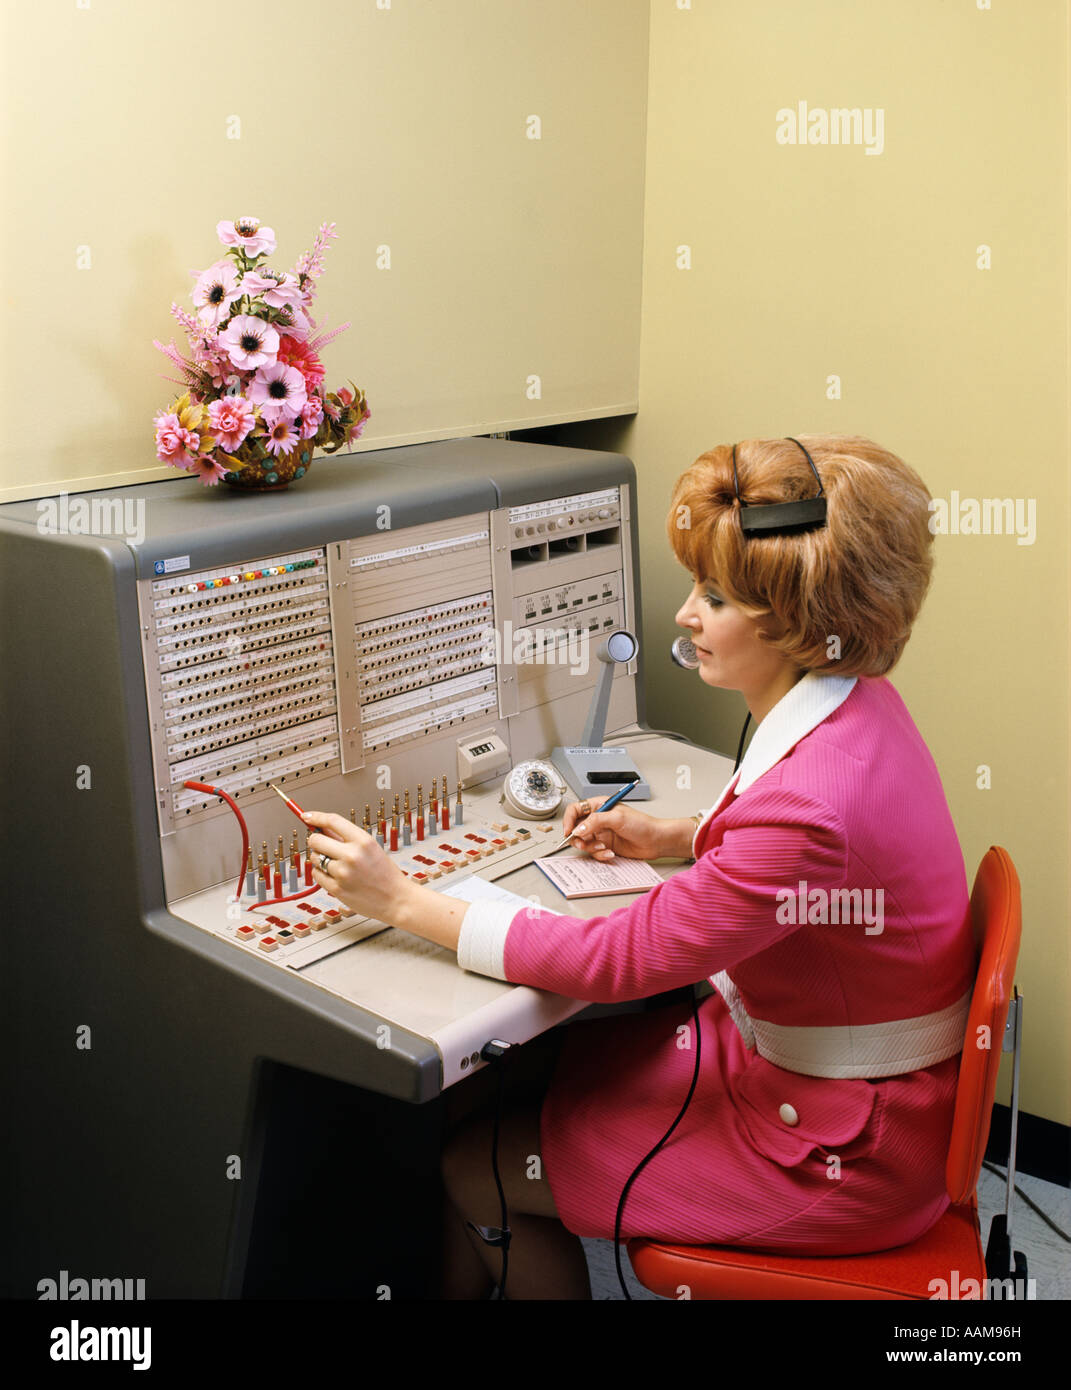 1970s WOMAN WORKING AT PBX TELEPHONE SWITCHBOARD Stock Photo